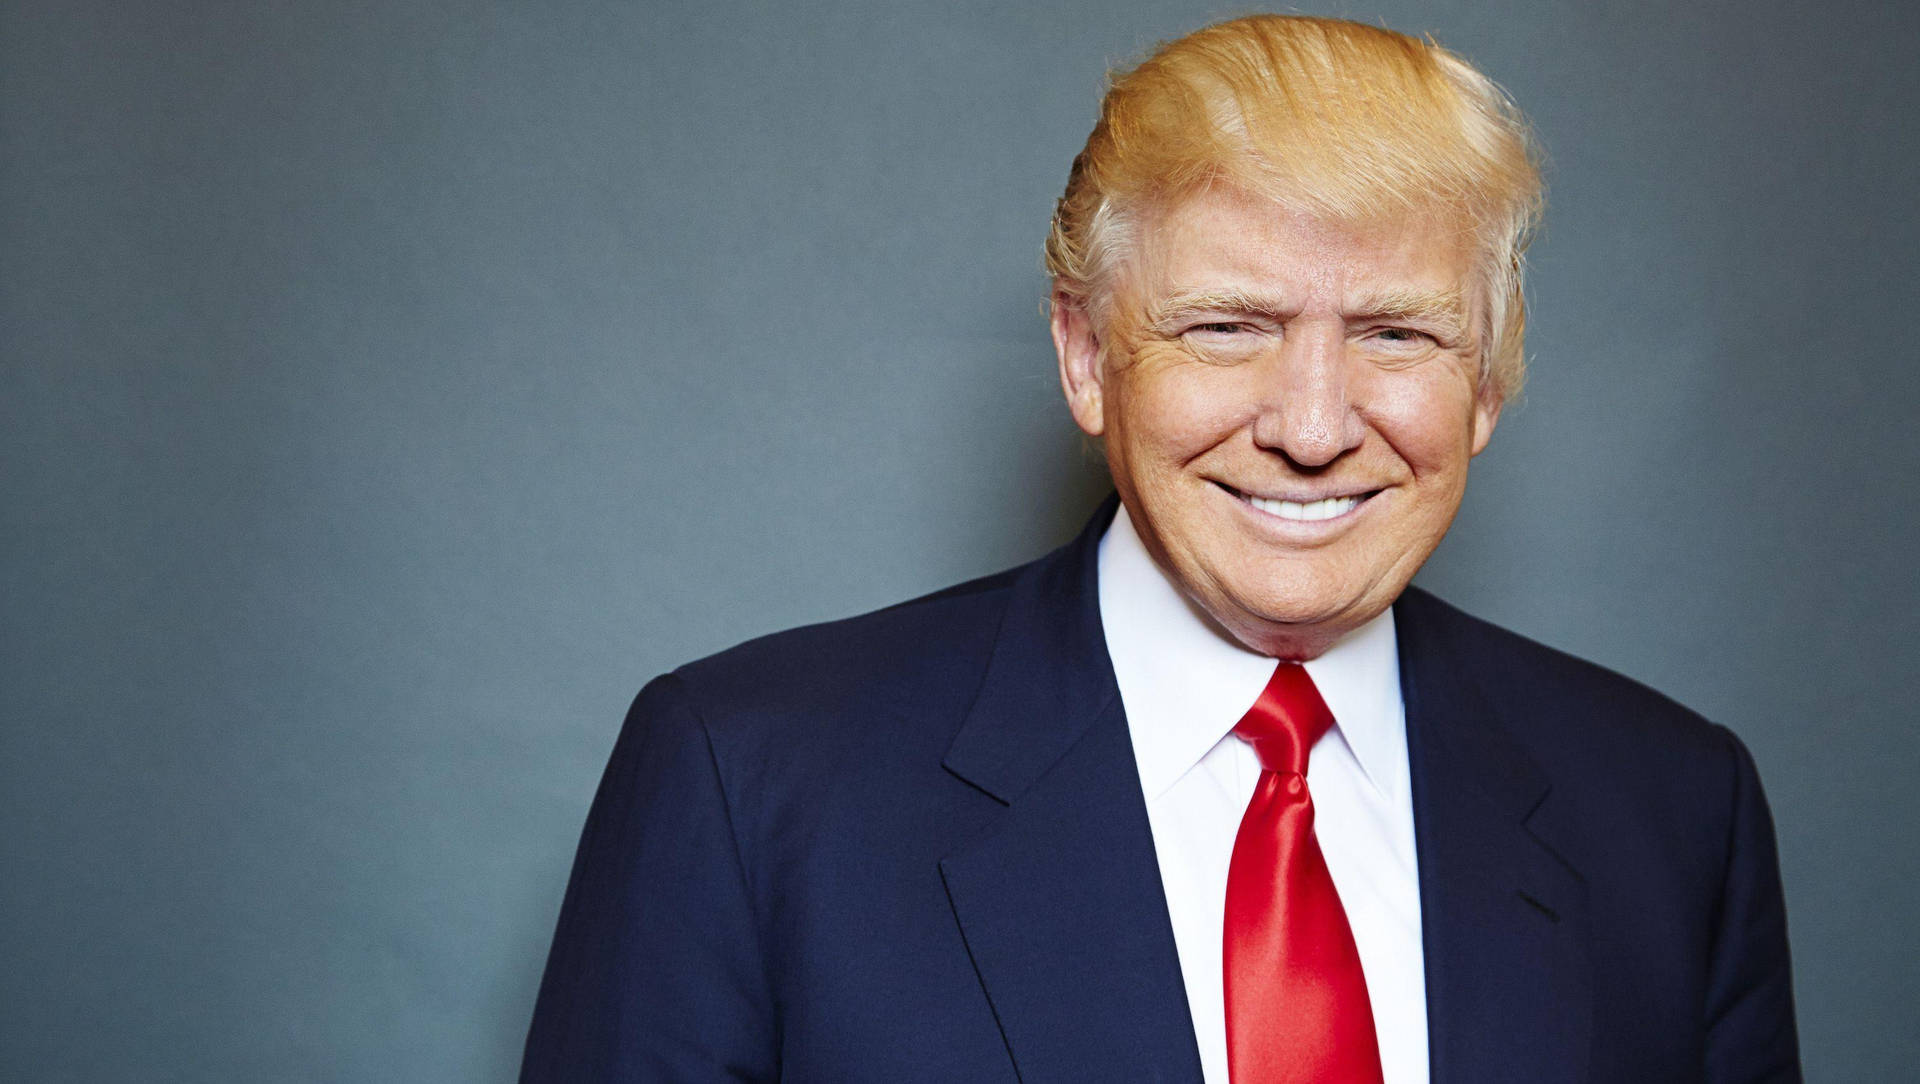 Donald Trump Smiling On Gray Background Wallpaper